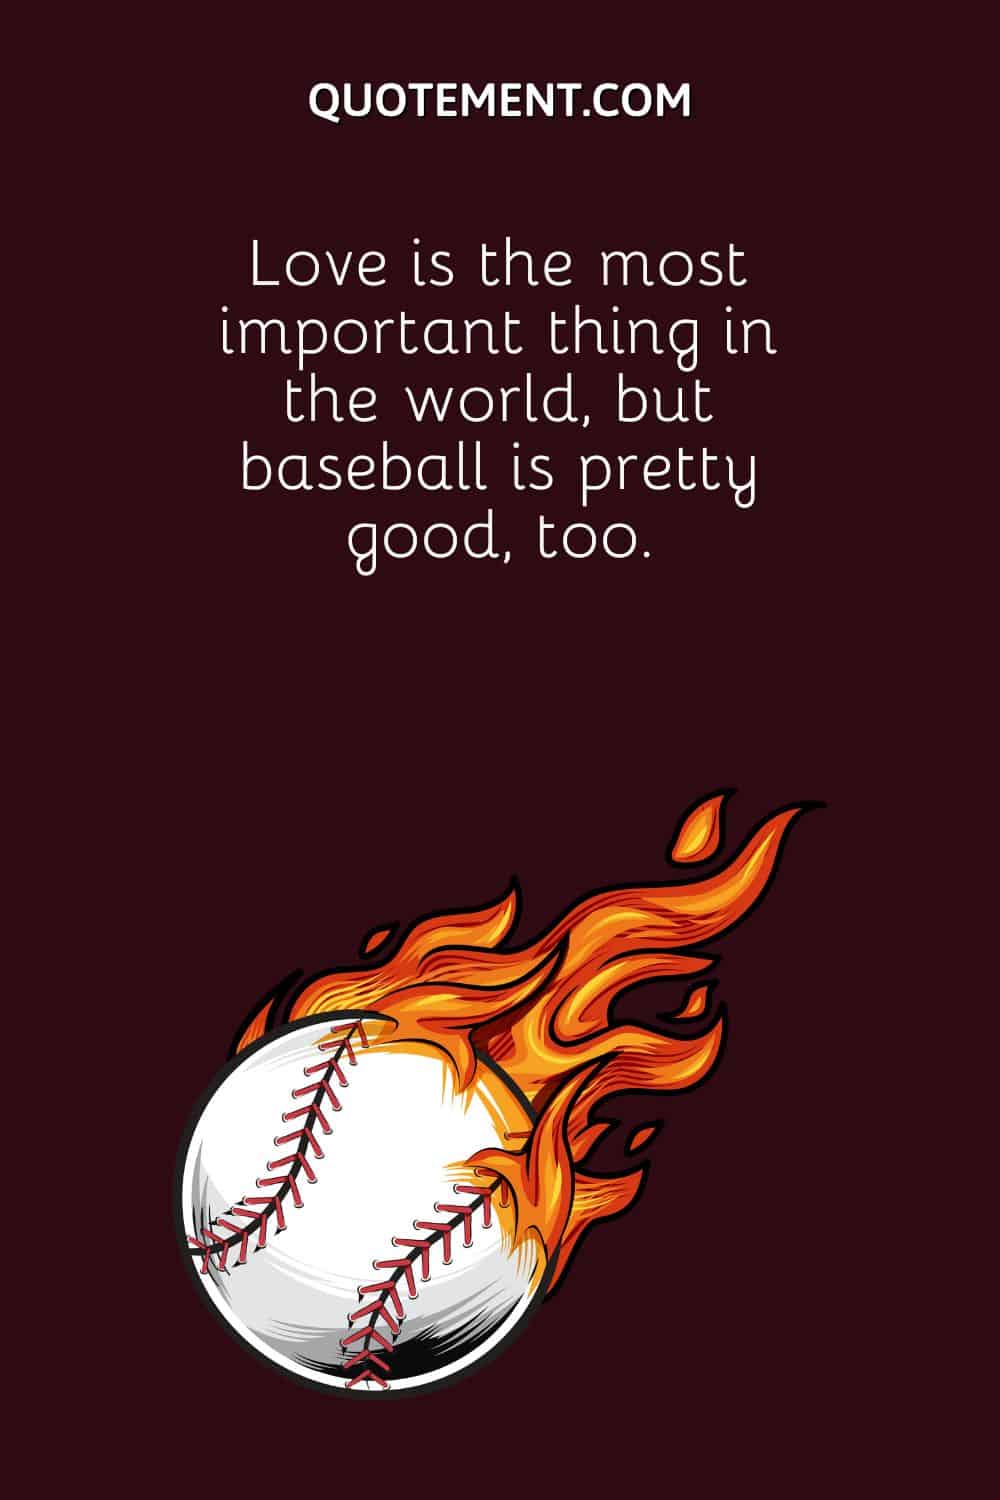 Love is the most important thing in the world, but baseball is pretty good, too